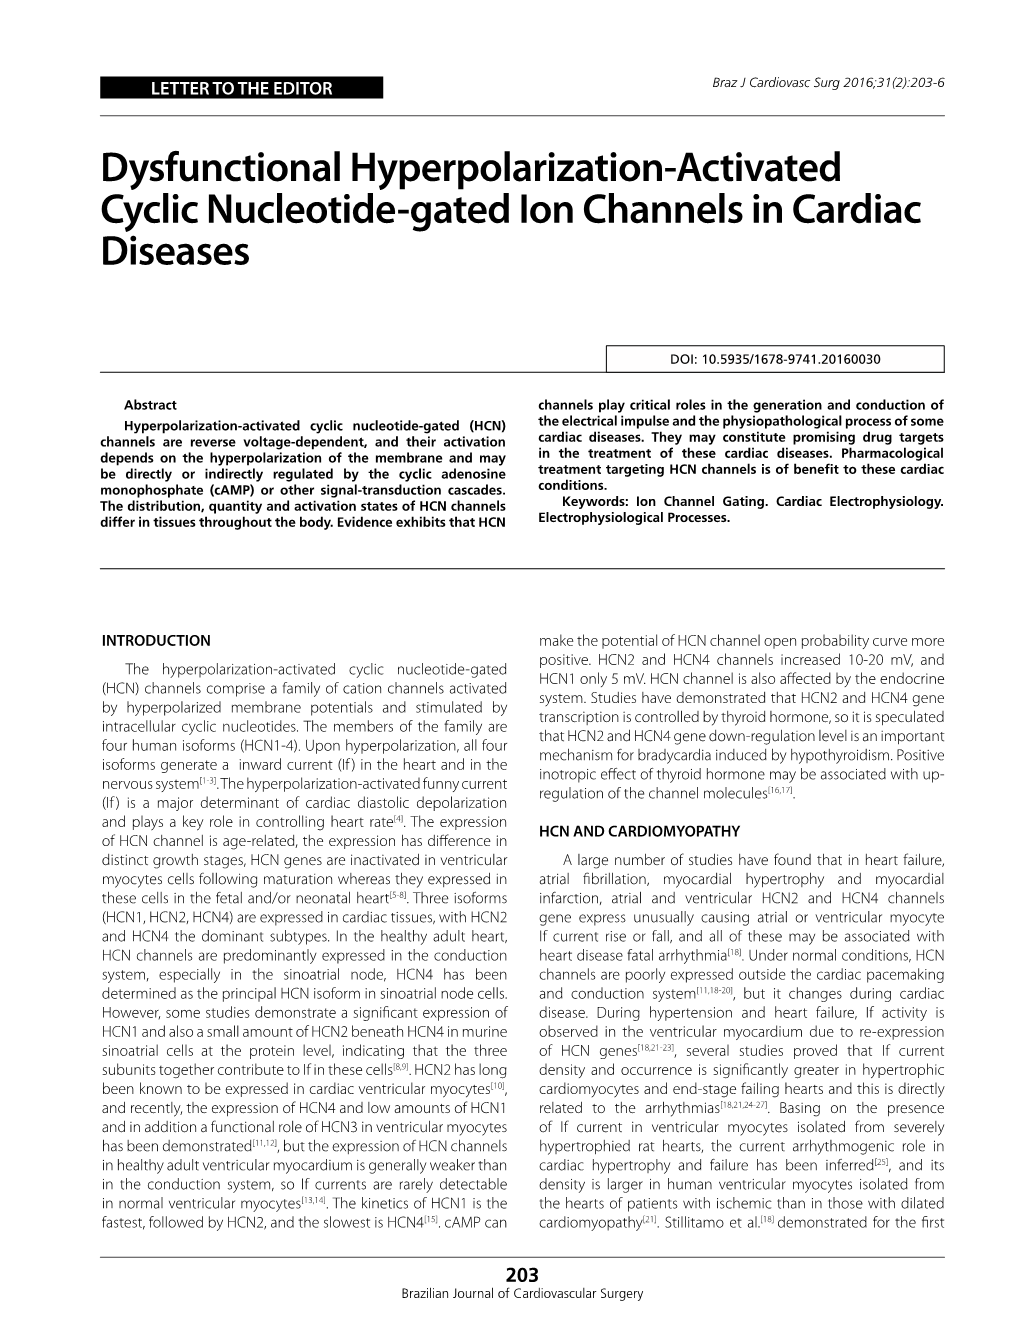 Dysfunctional Hyperpolarization-Activated Cyclic Nucleotide-Gated Ion Channels in Cardiac Diseases